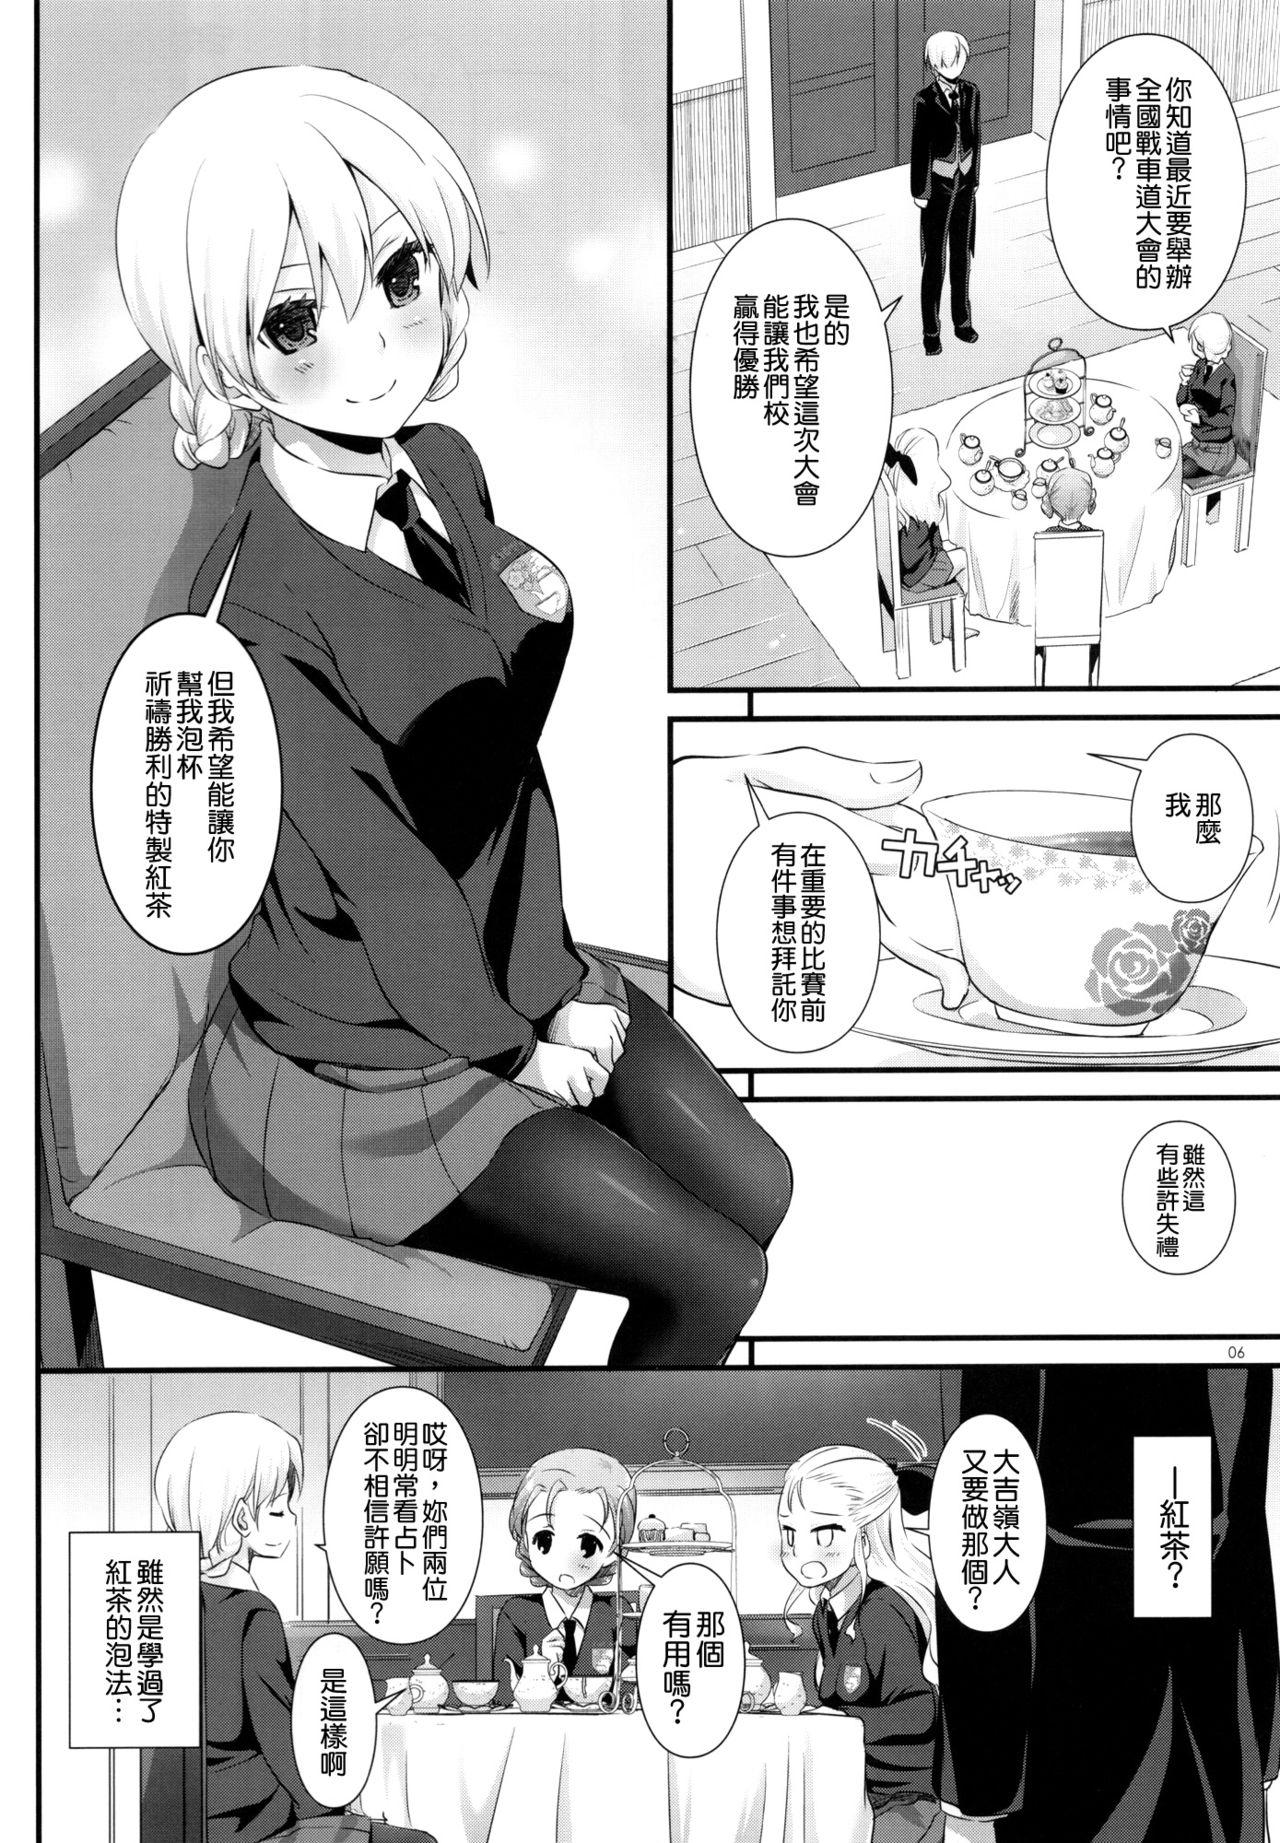 Moms D.L. action 112 - Girls und panzer Naughty - Page 6